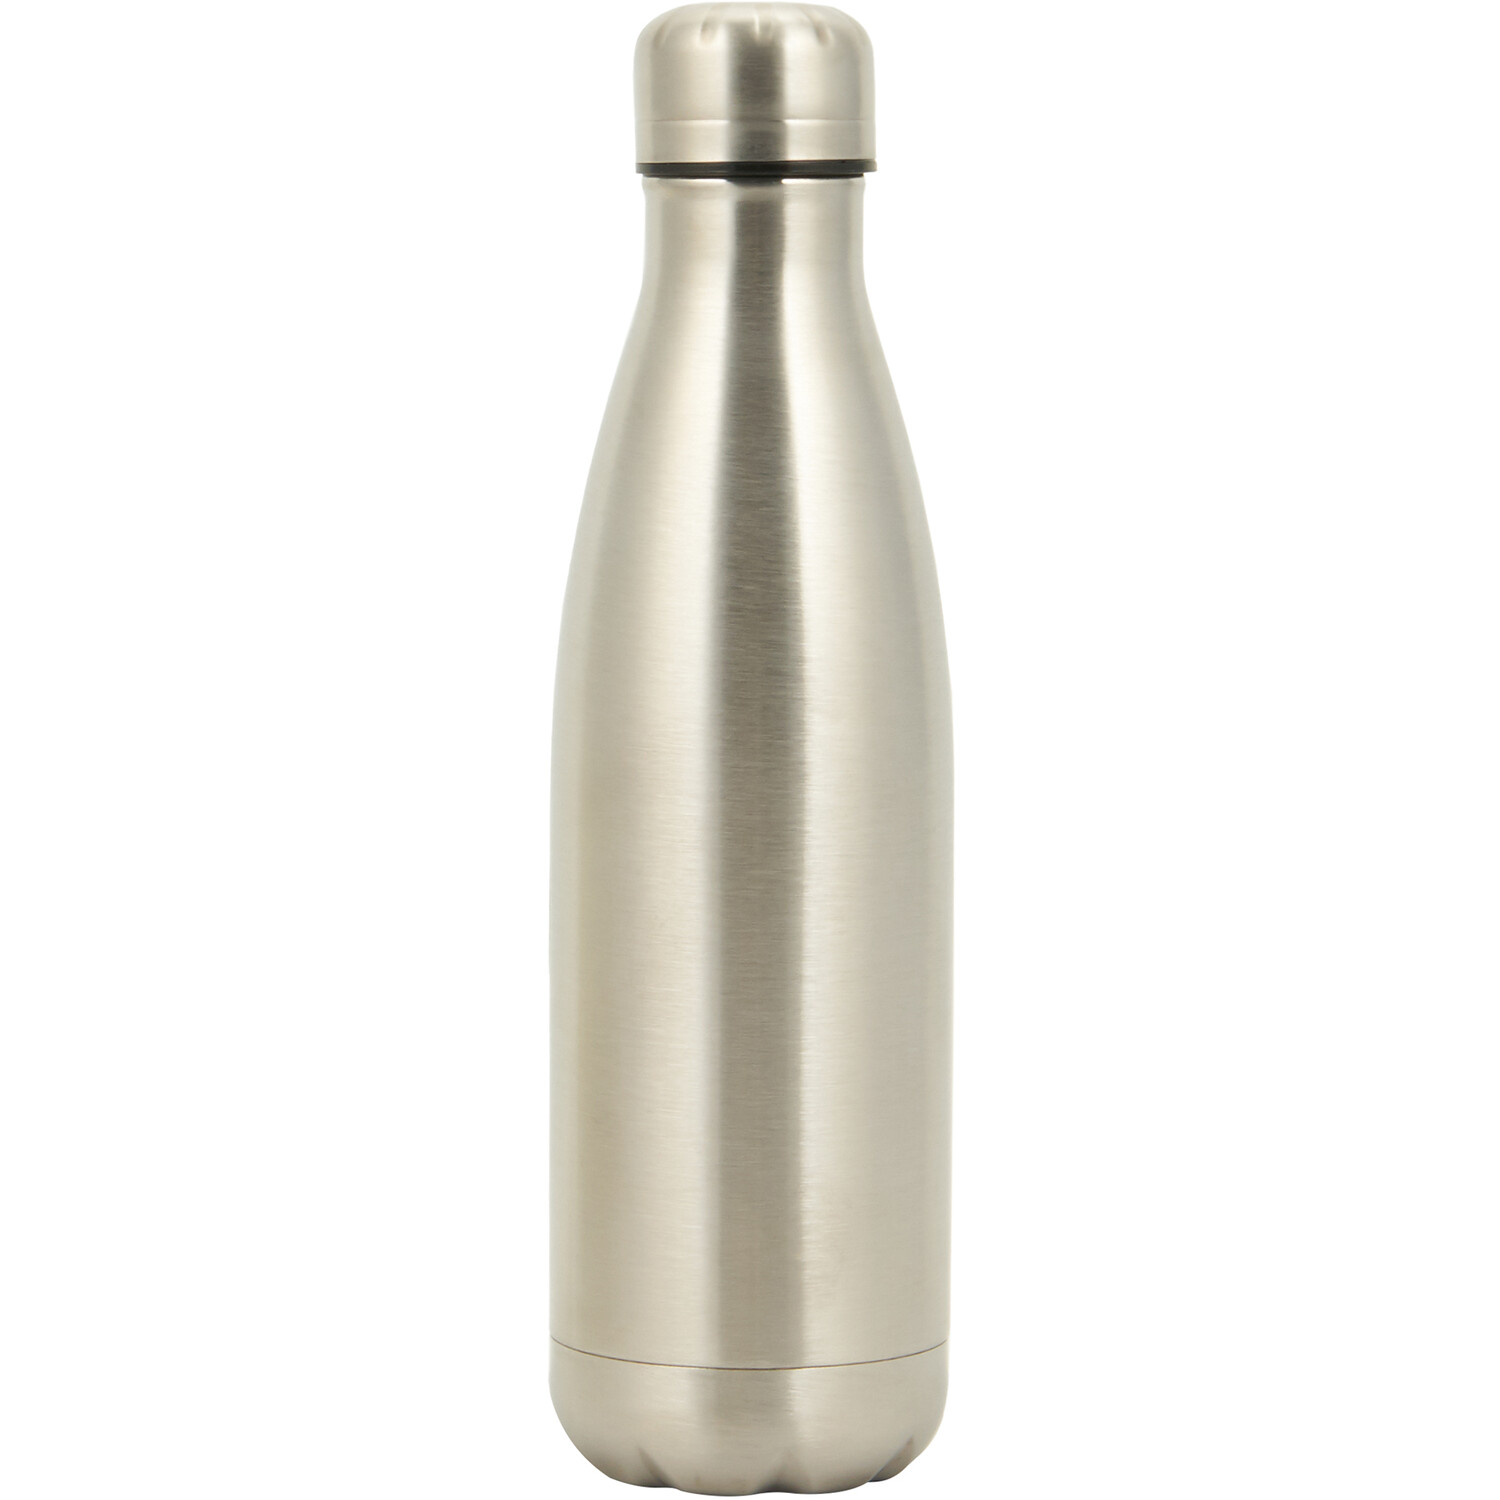 Nitro Everyday 2-in-1 Flask and Bottle - Gold Image 1